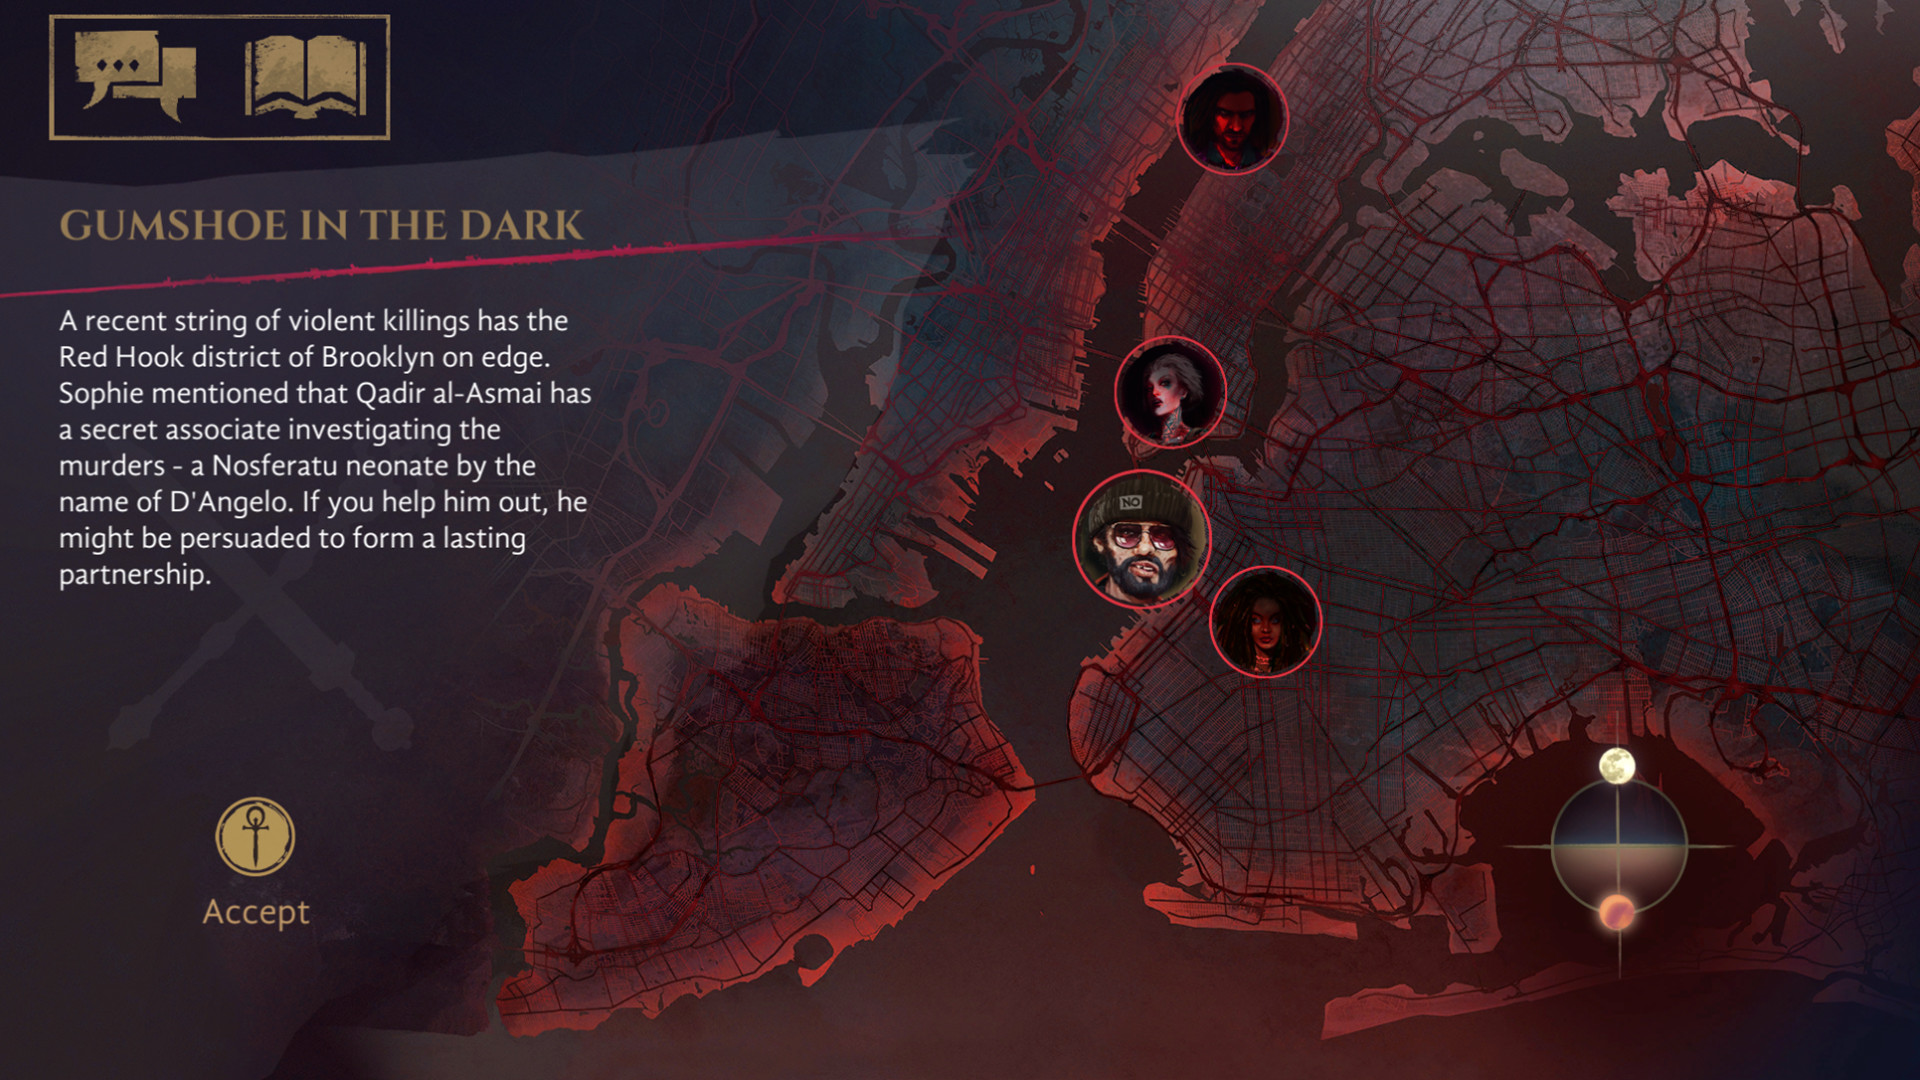 Vampire: The Masquerade - Coteries of New York Free Download